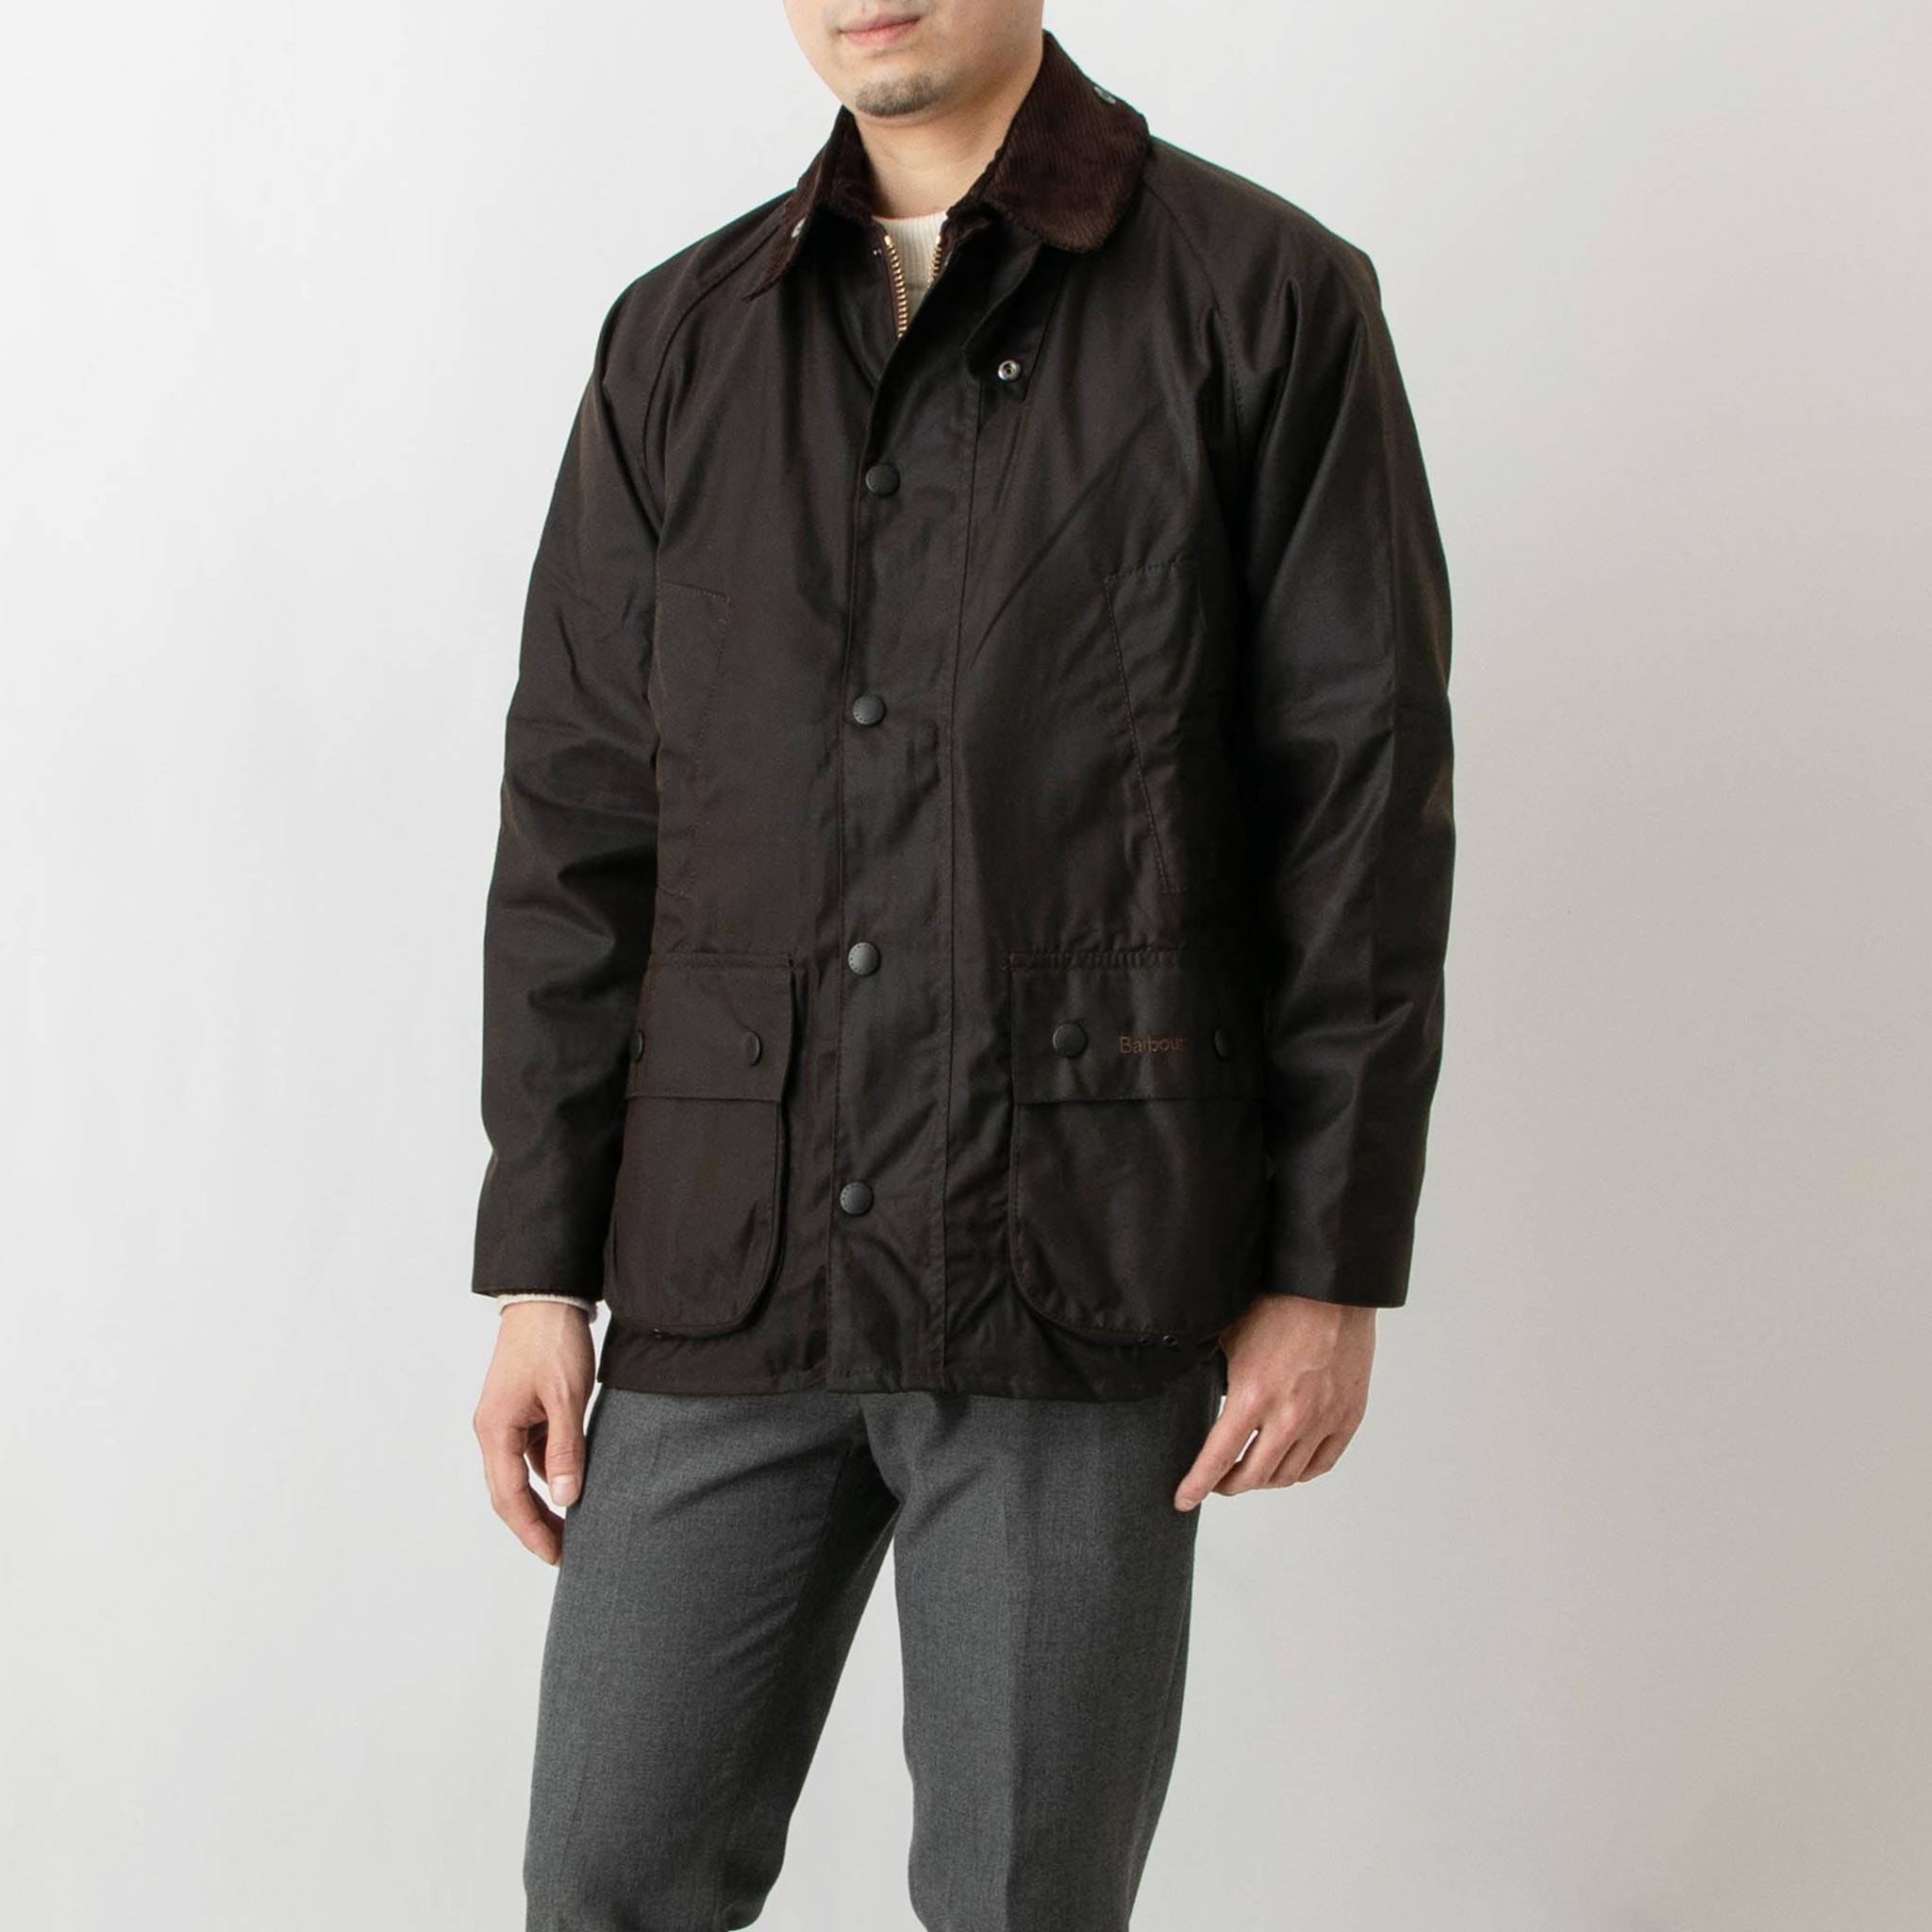 BARBOUR - CLASSIC BEDALE WAX JACKET MWX0010 OL71